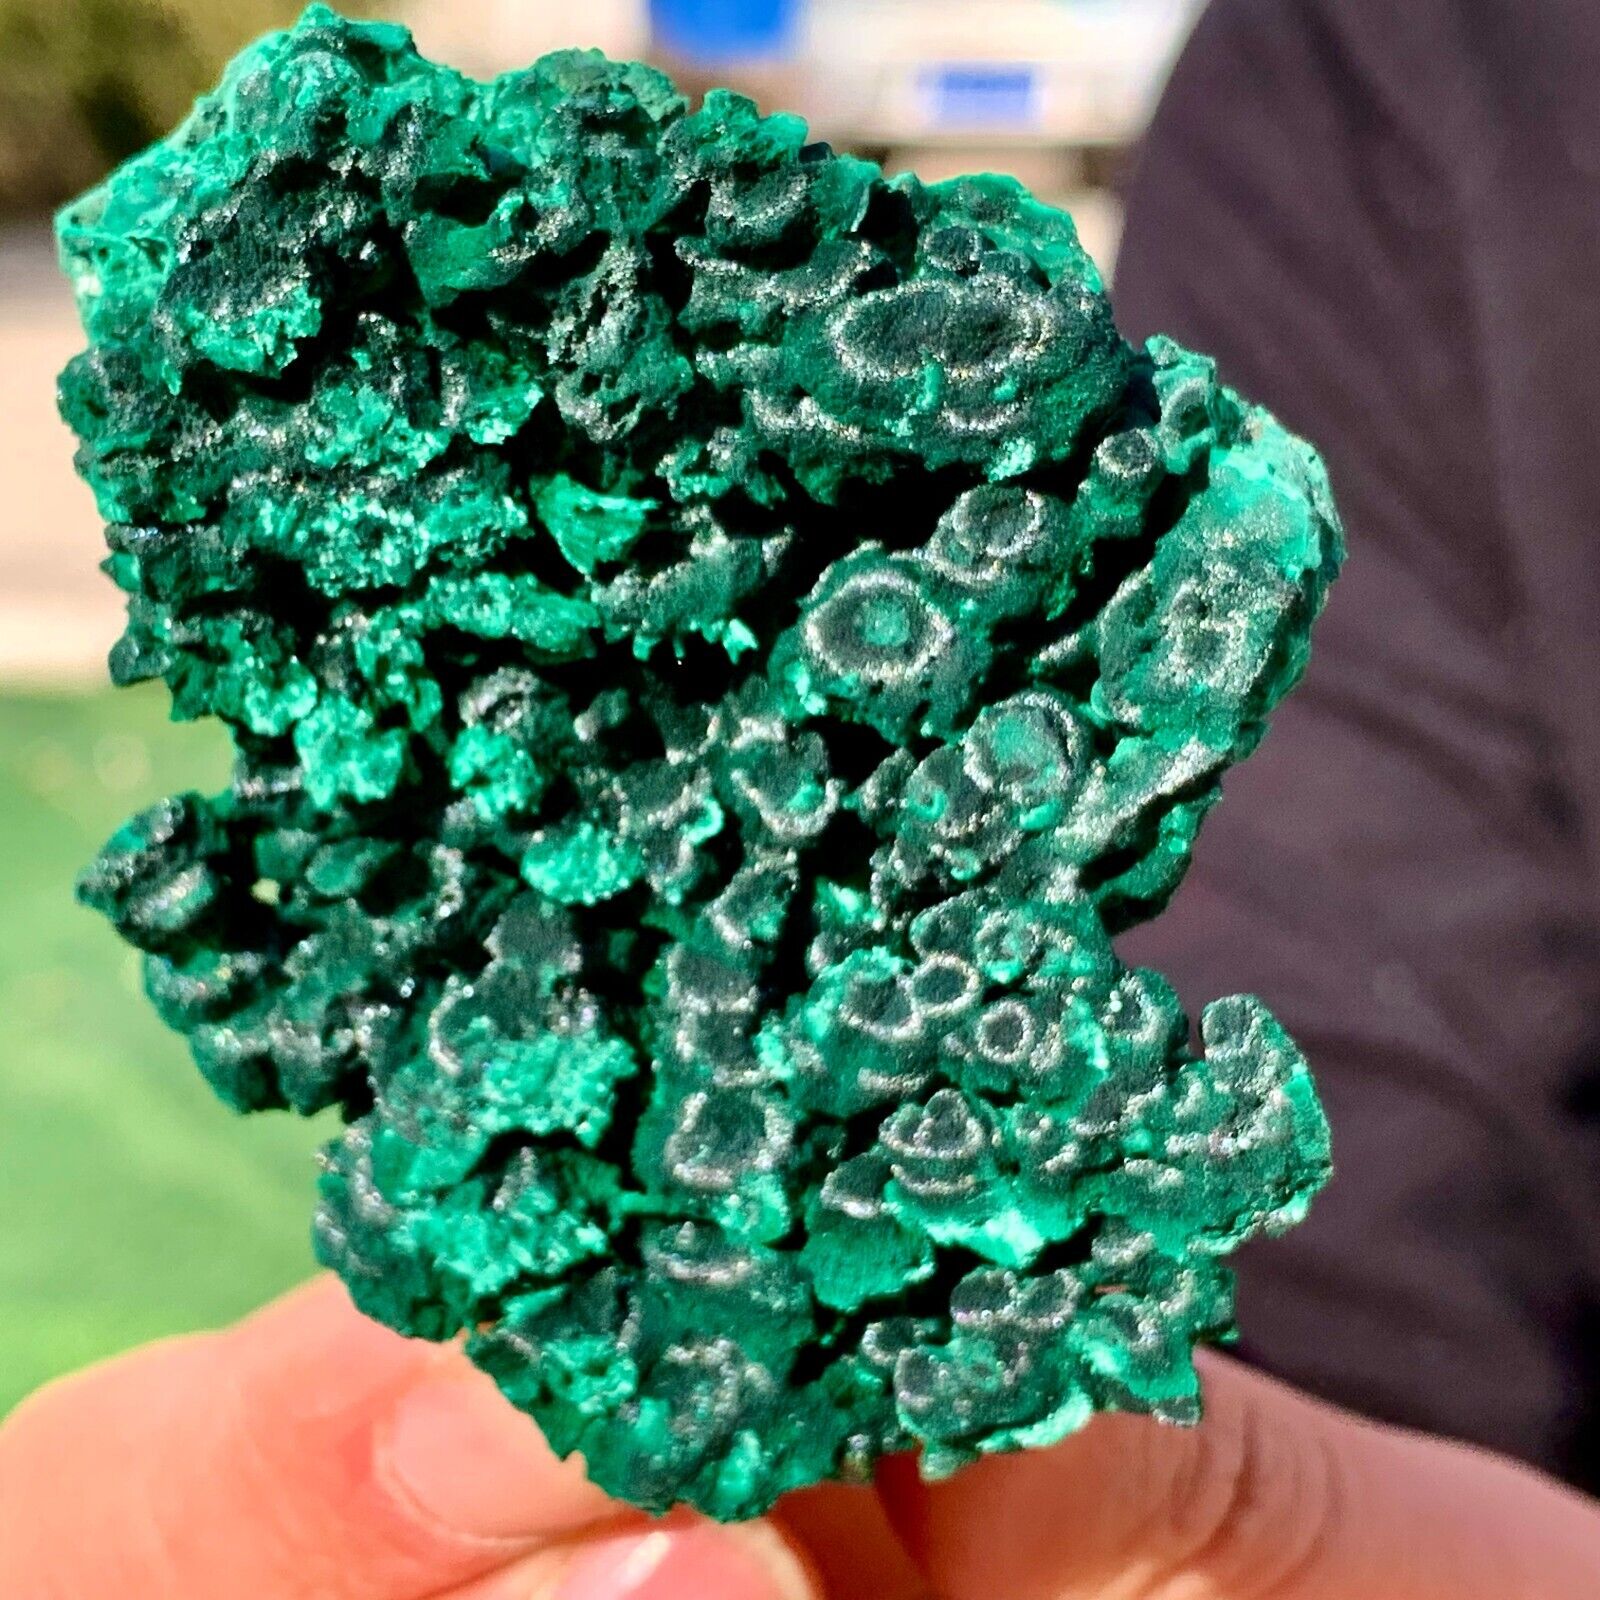 99g Natural glossy Malachite cat eye transparent cluster rough mineral sample